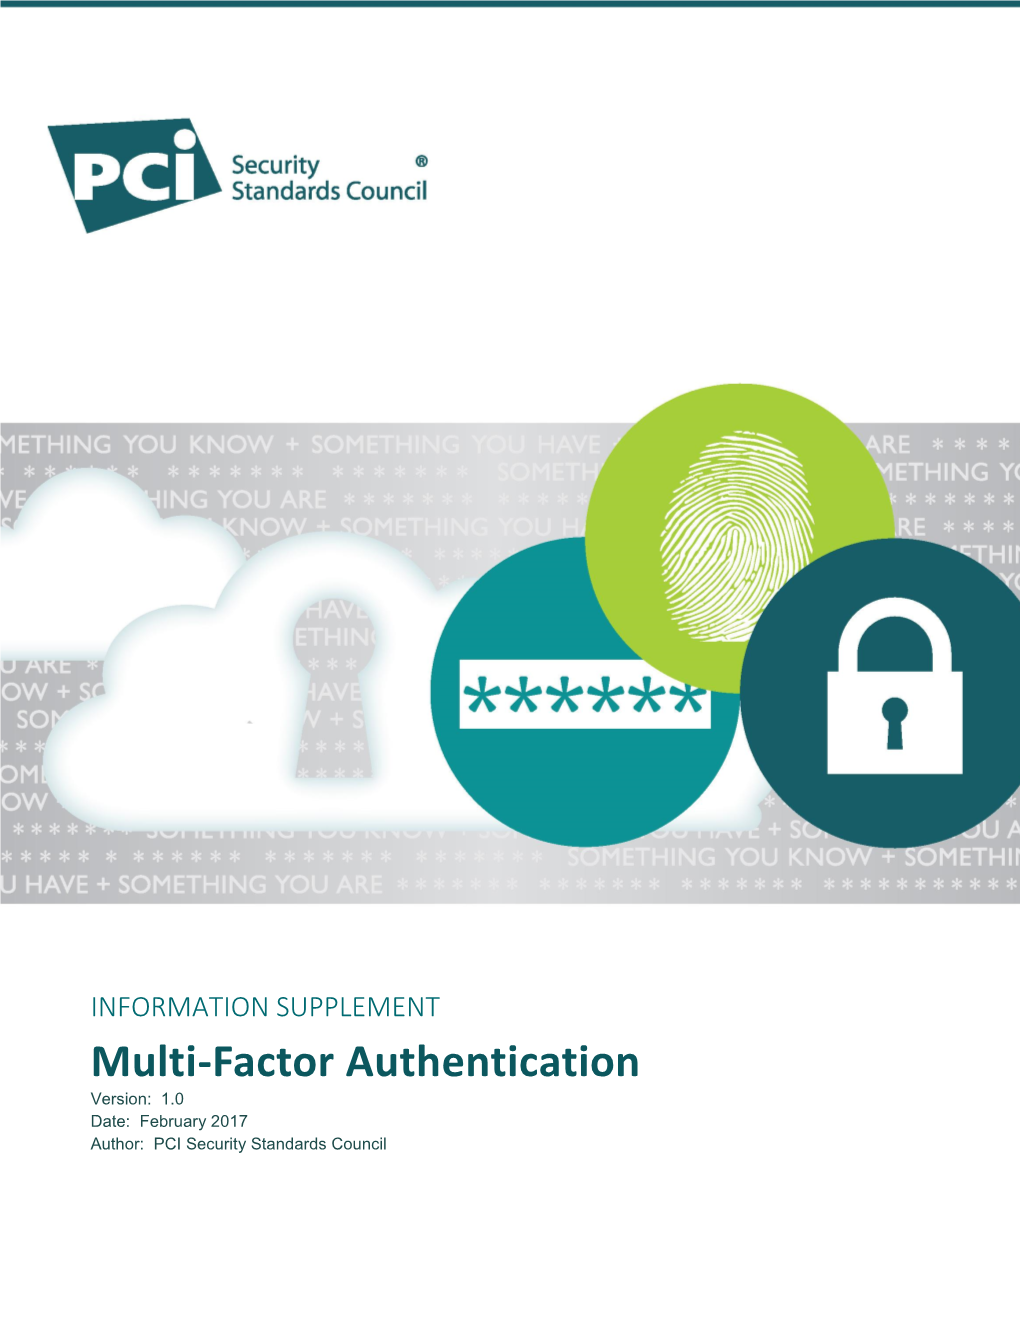 Multi-Factor Authentication Version: 1.0 Date: February 2017 Author: PCI Security Standards Council